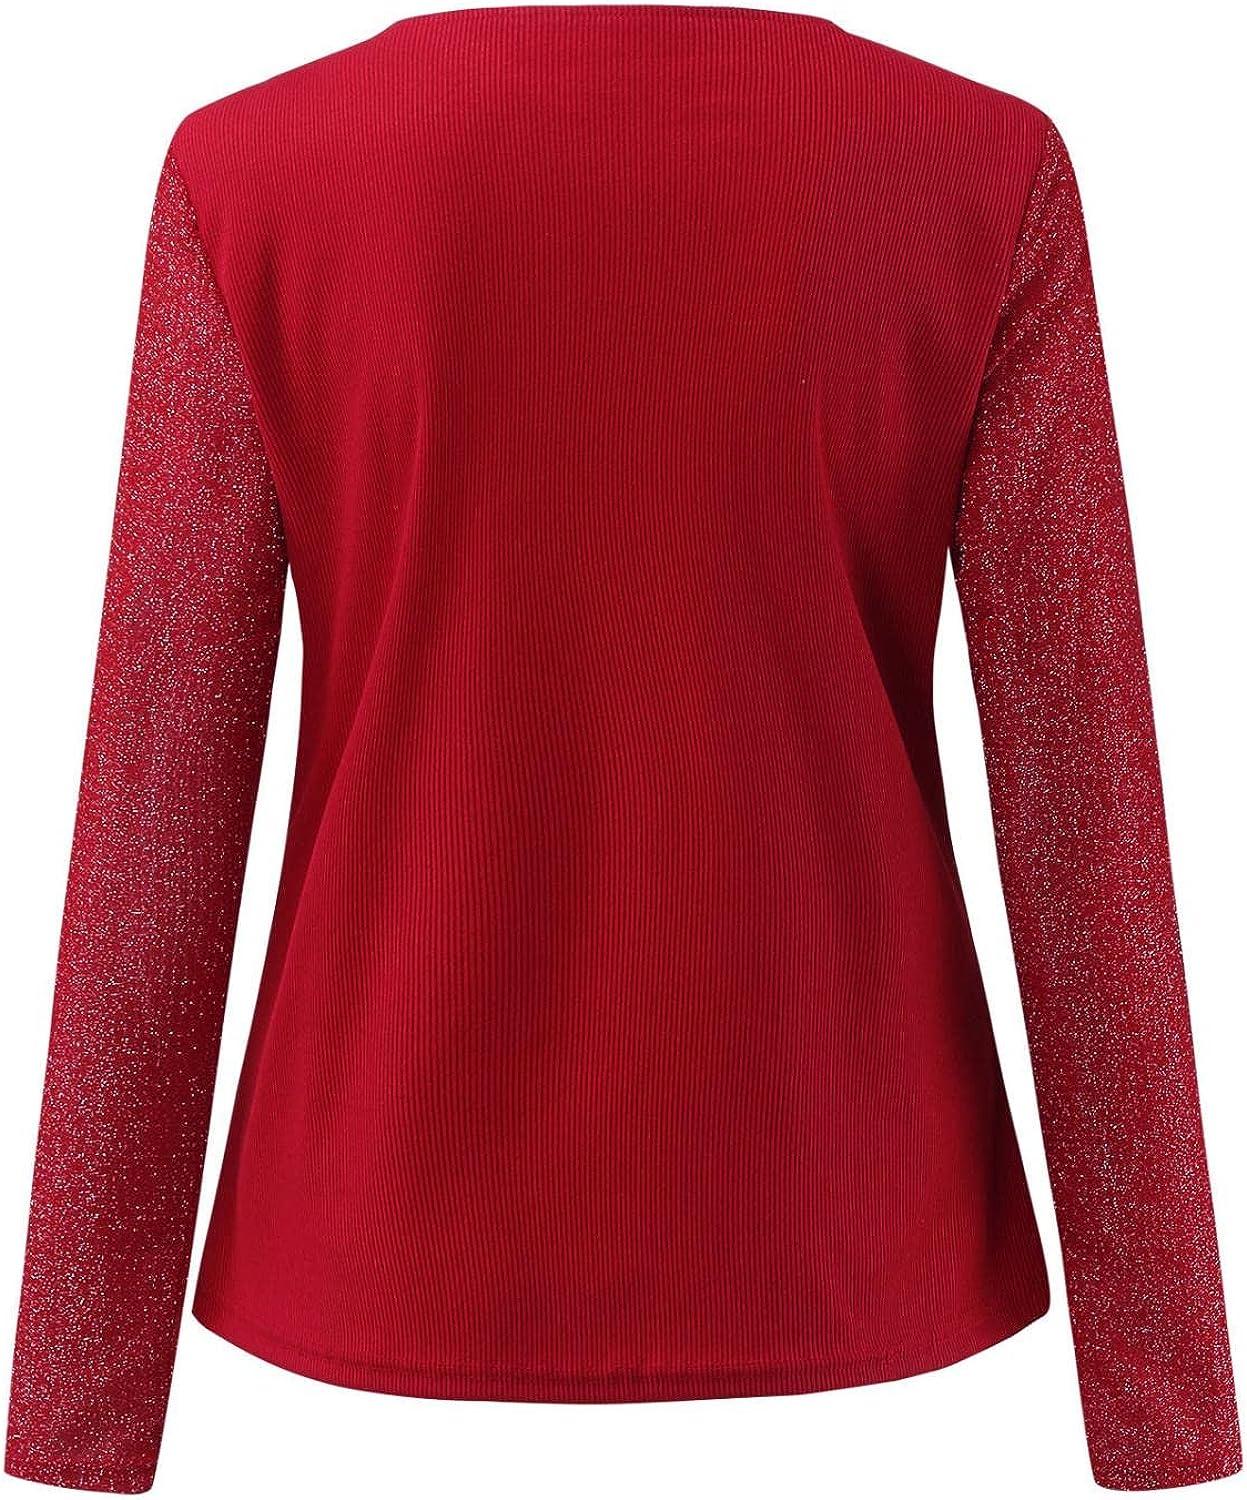 Long Sleeve Shirts for Women, Women's Long Sleeve Tops Dressy V neck Casual  Fall Henley Shirts Button Down Blouses T Shirts Small Red